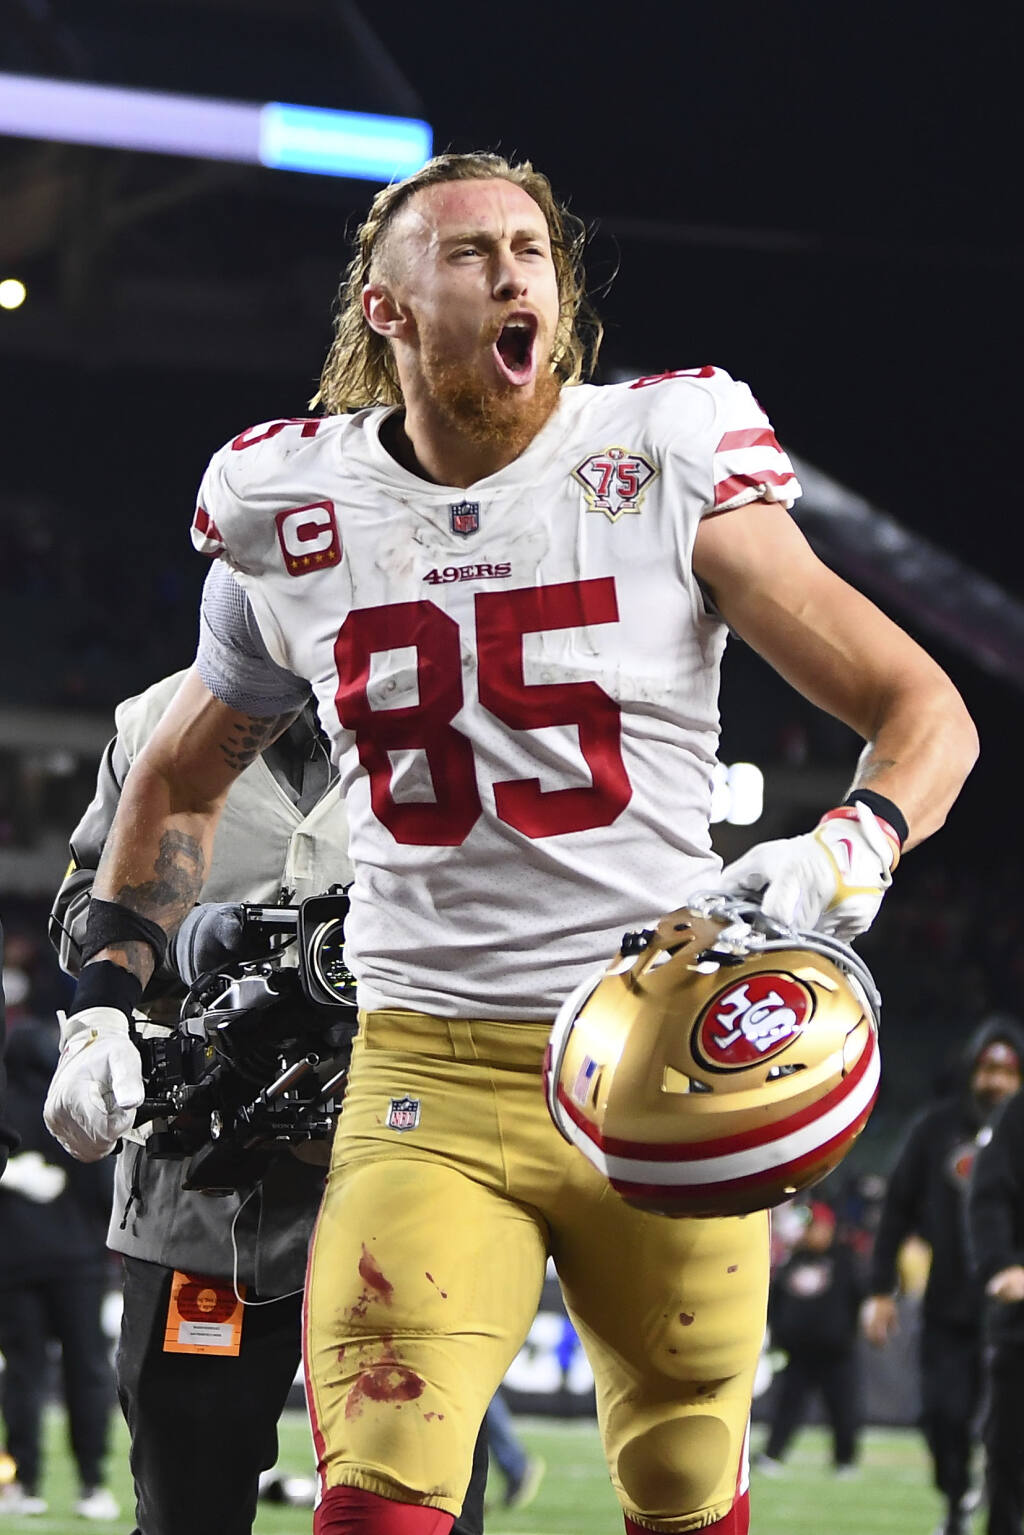 Nevius: In appreciation of George Kittle, the 49ers' lovable goofball